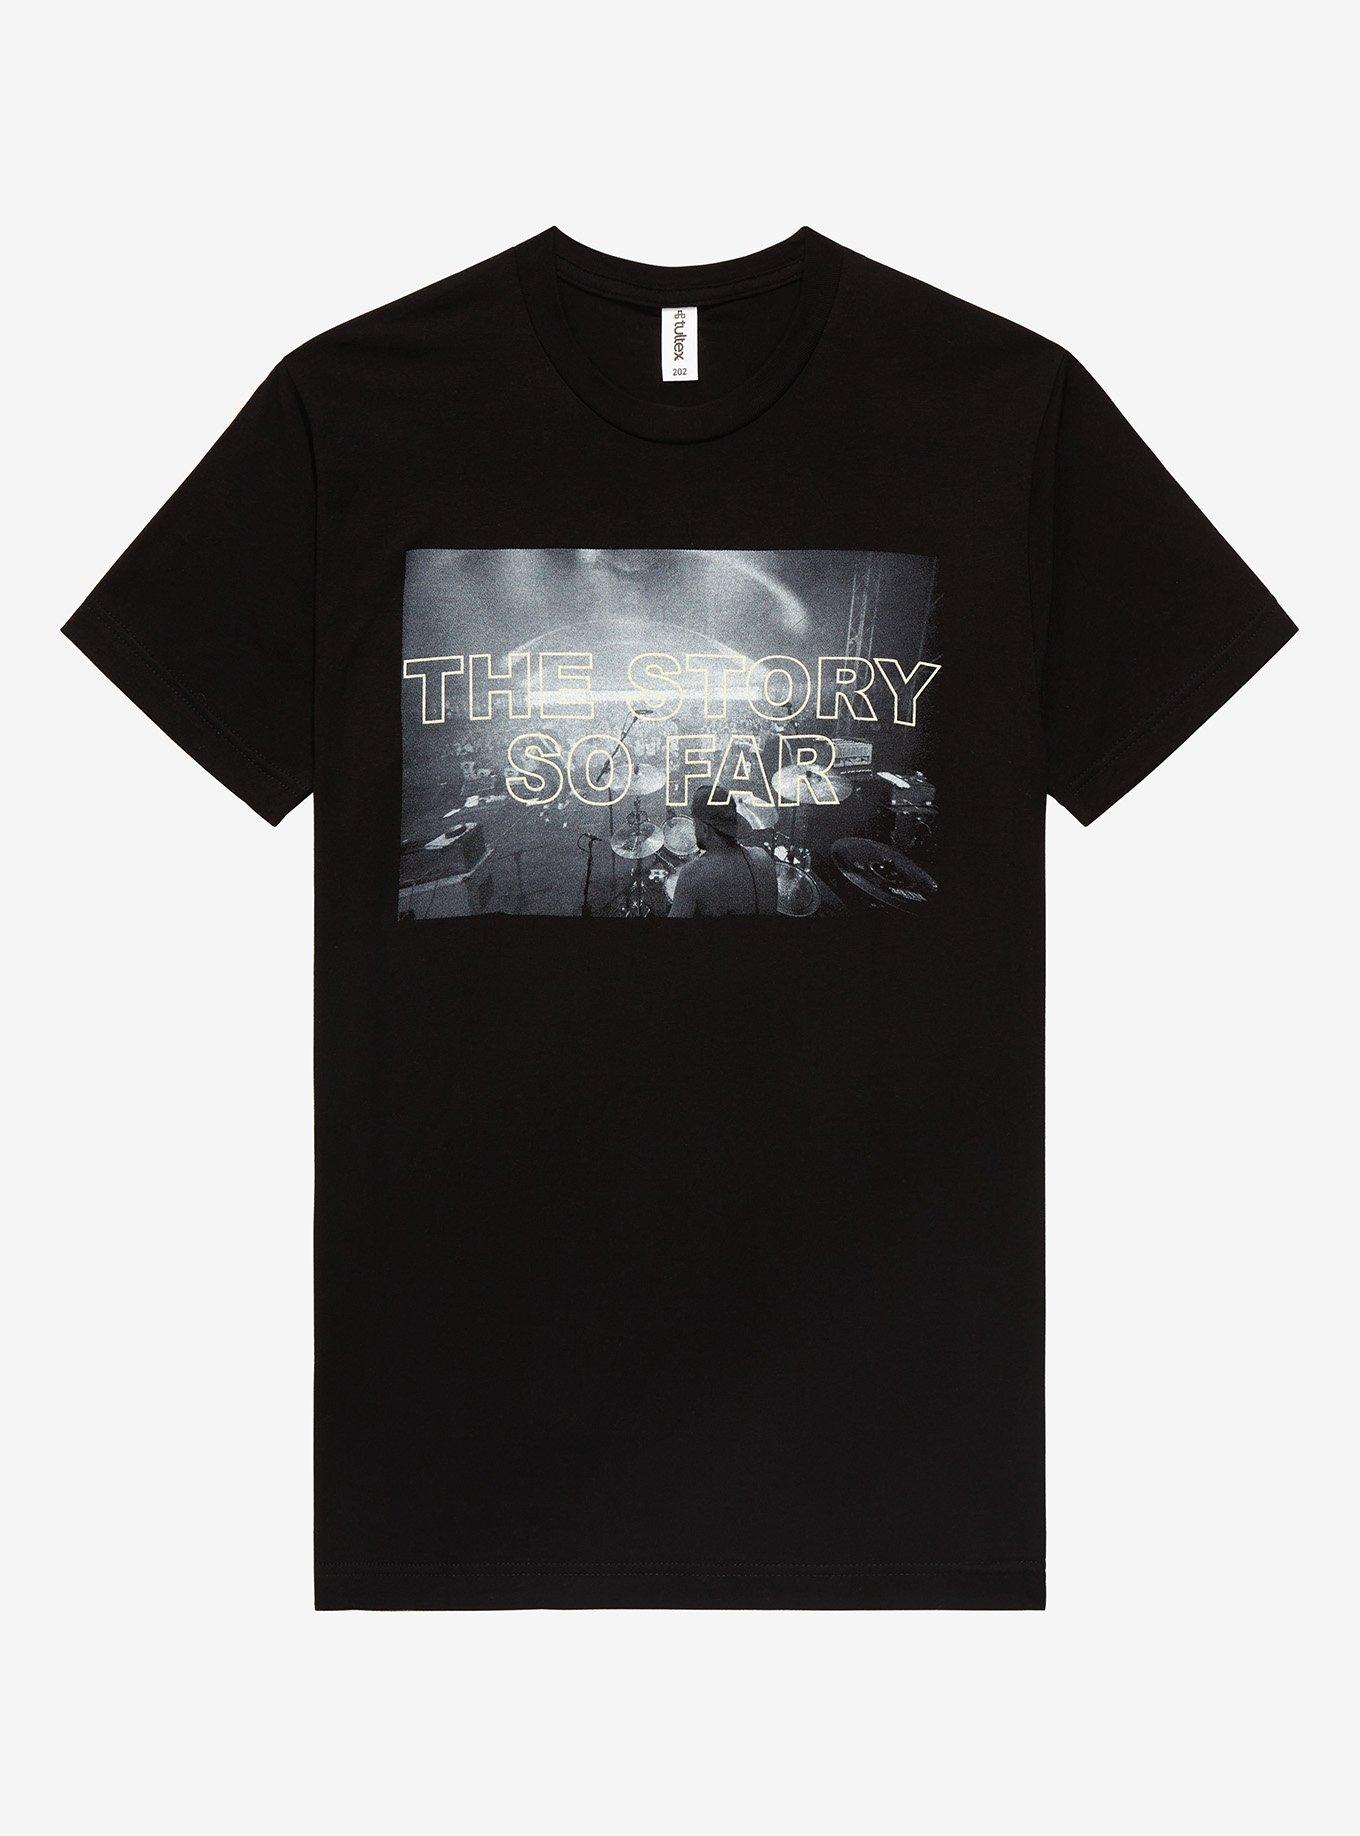 The Story So Far Live Photo T-Shirt | Hot Topic